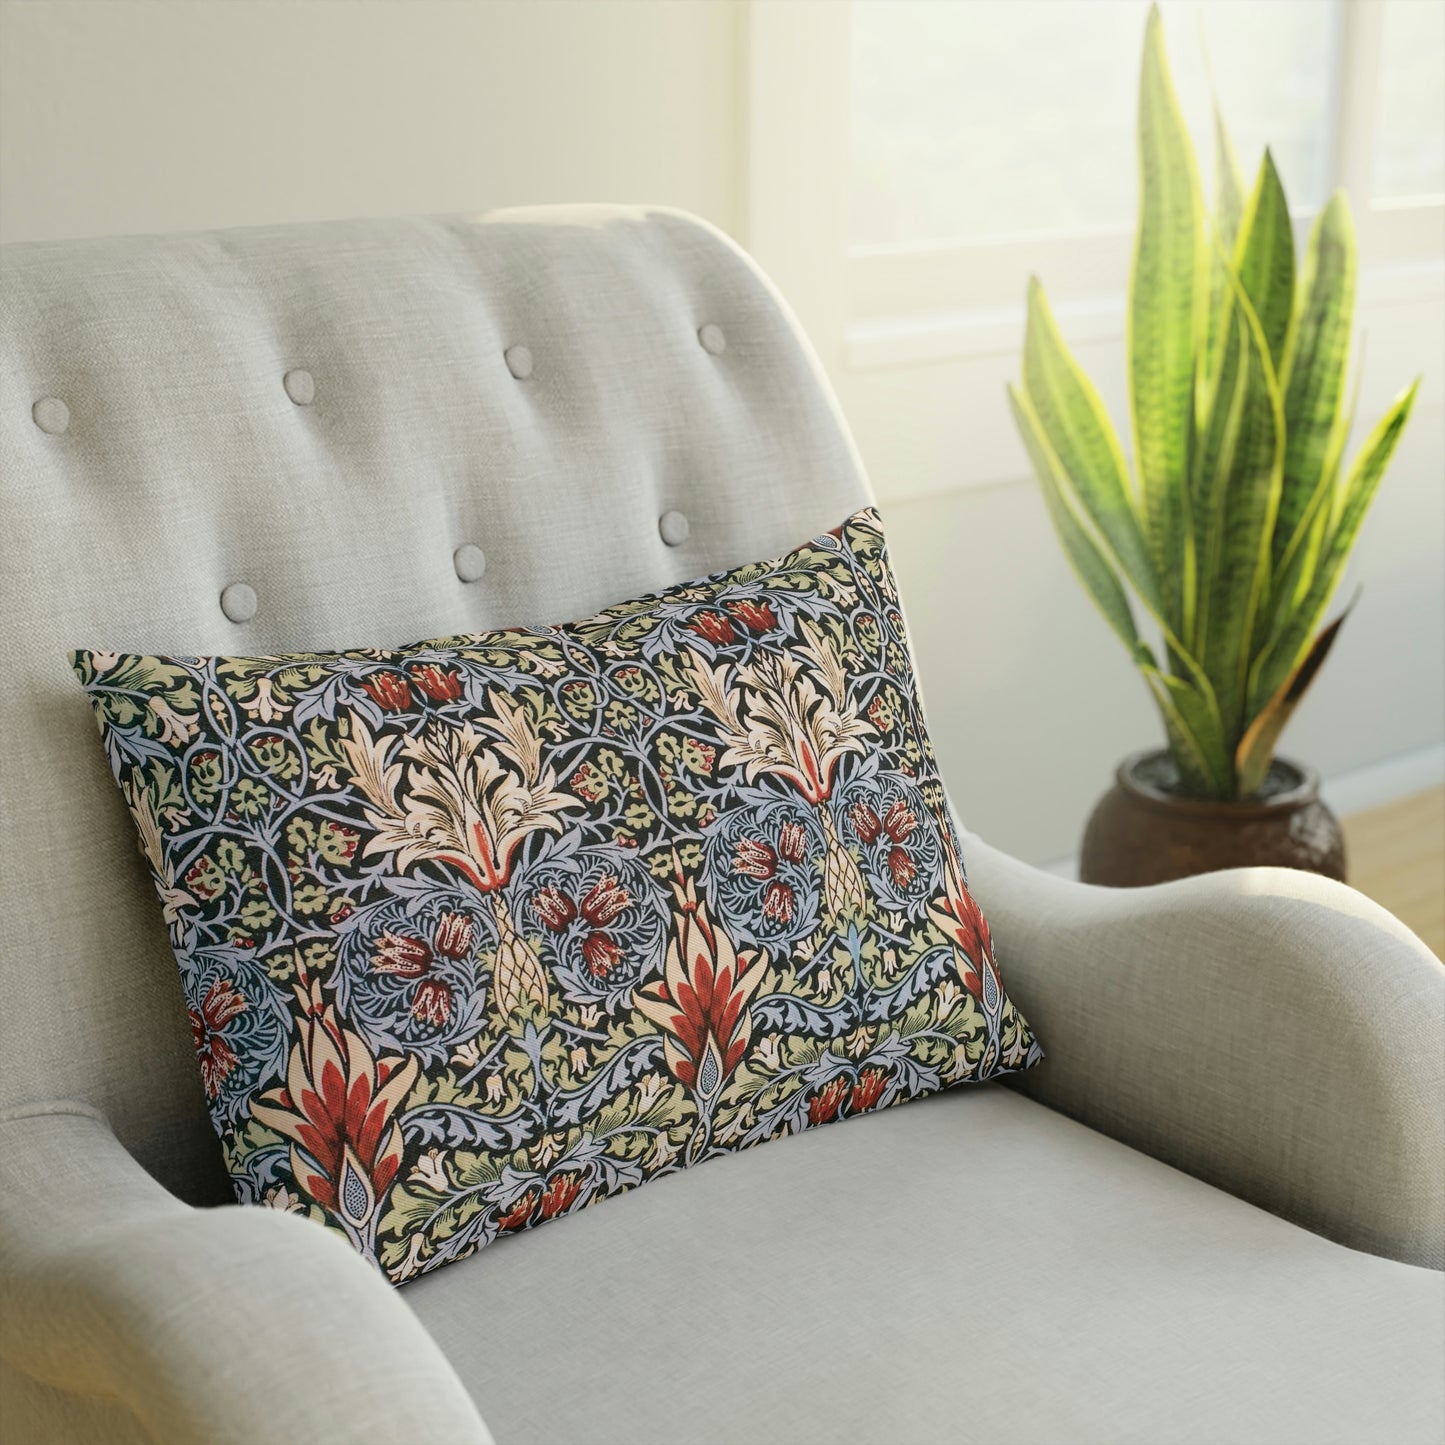 William-Morris-and-Co-Cushion-and-Cushion-Cover-Snakeshead-Collection-14